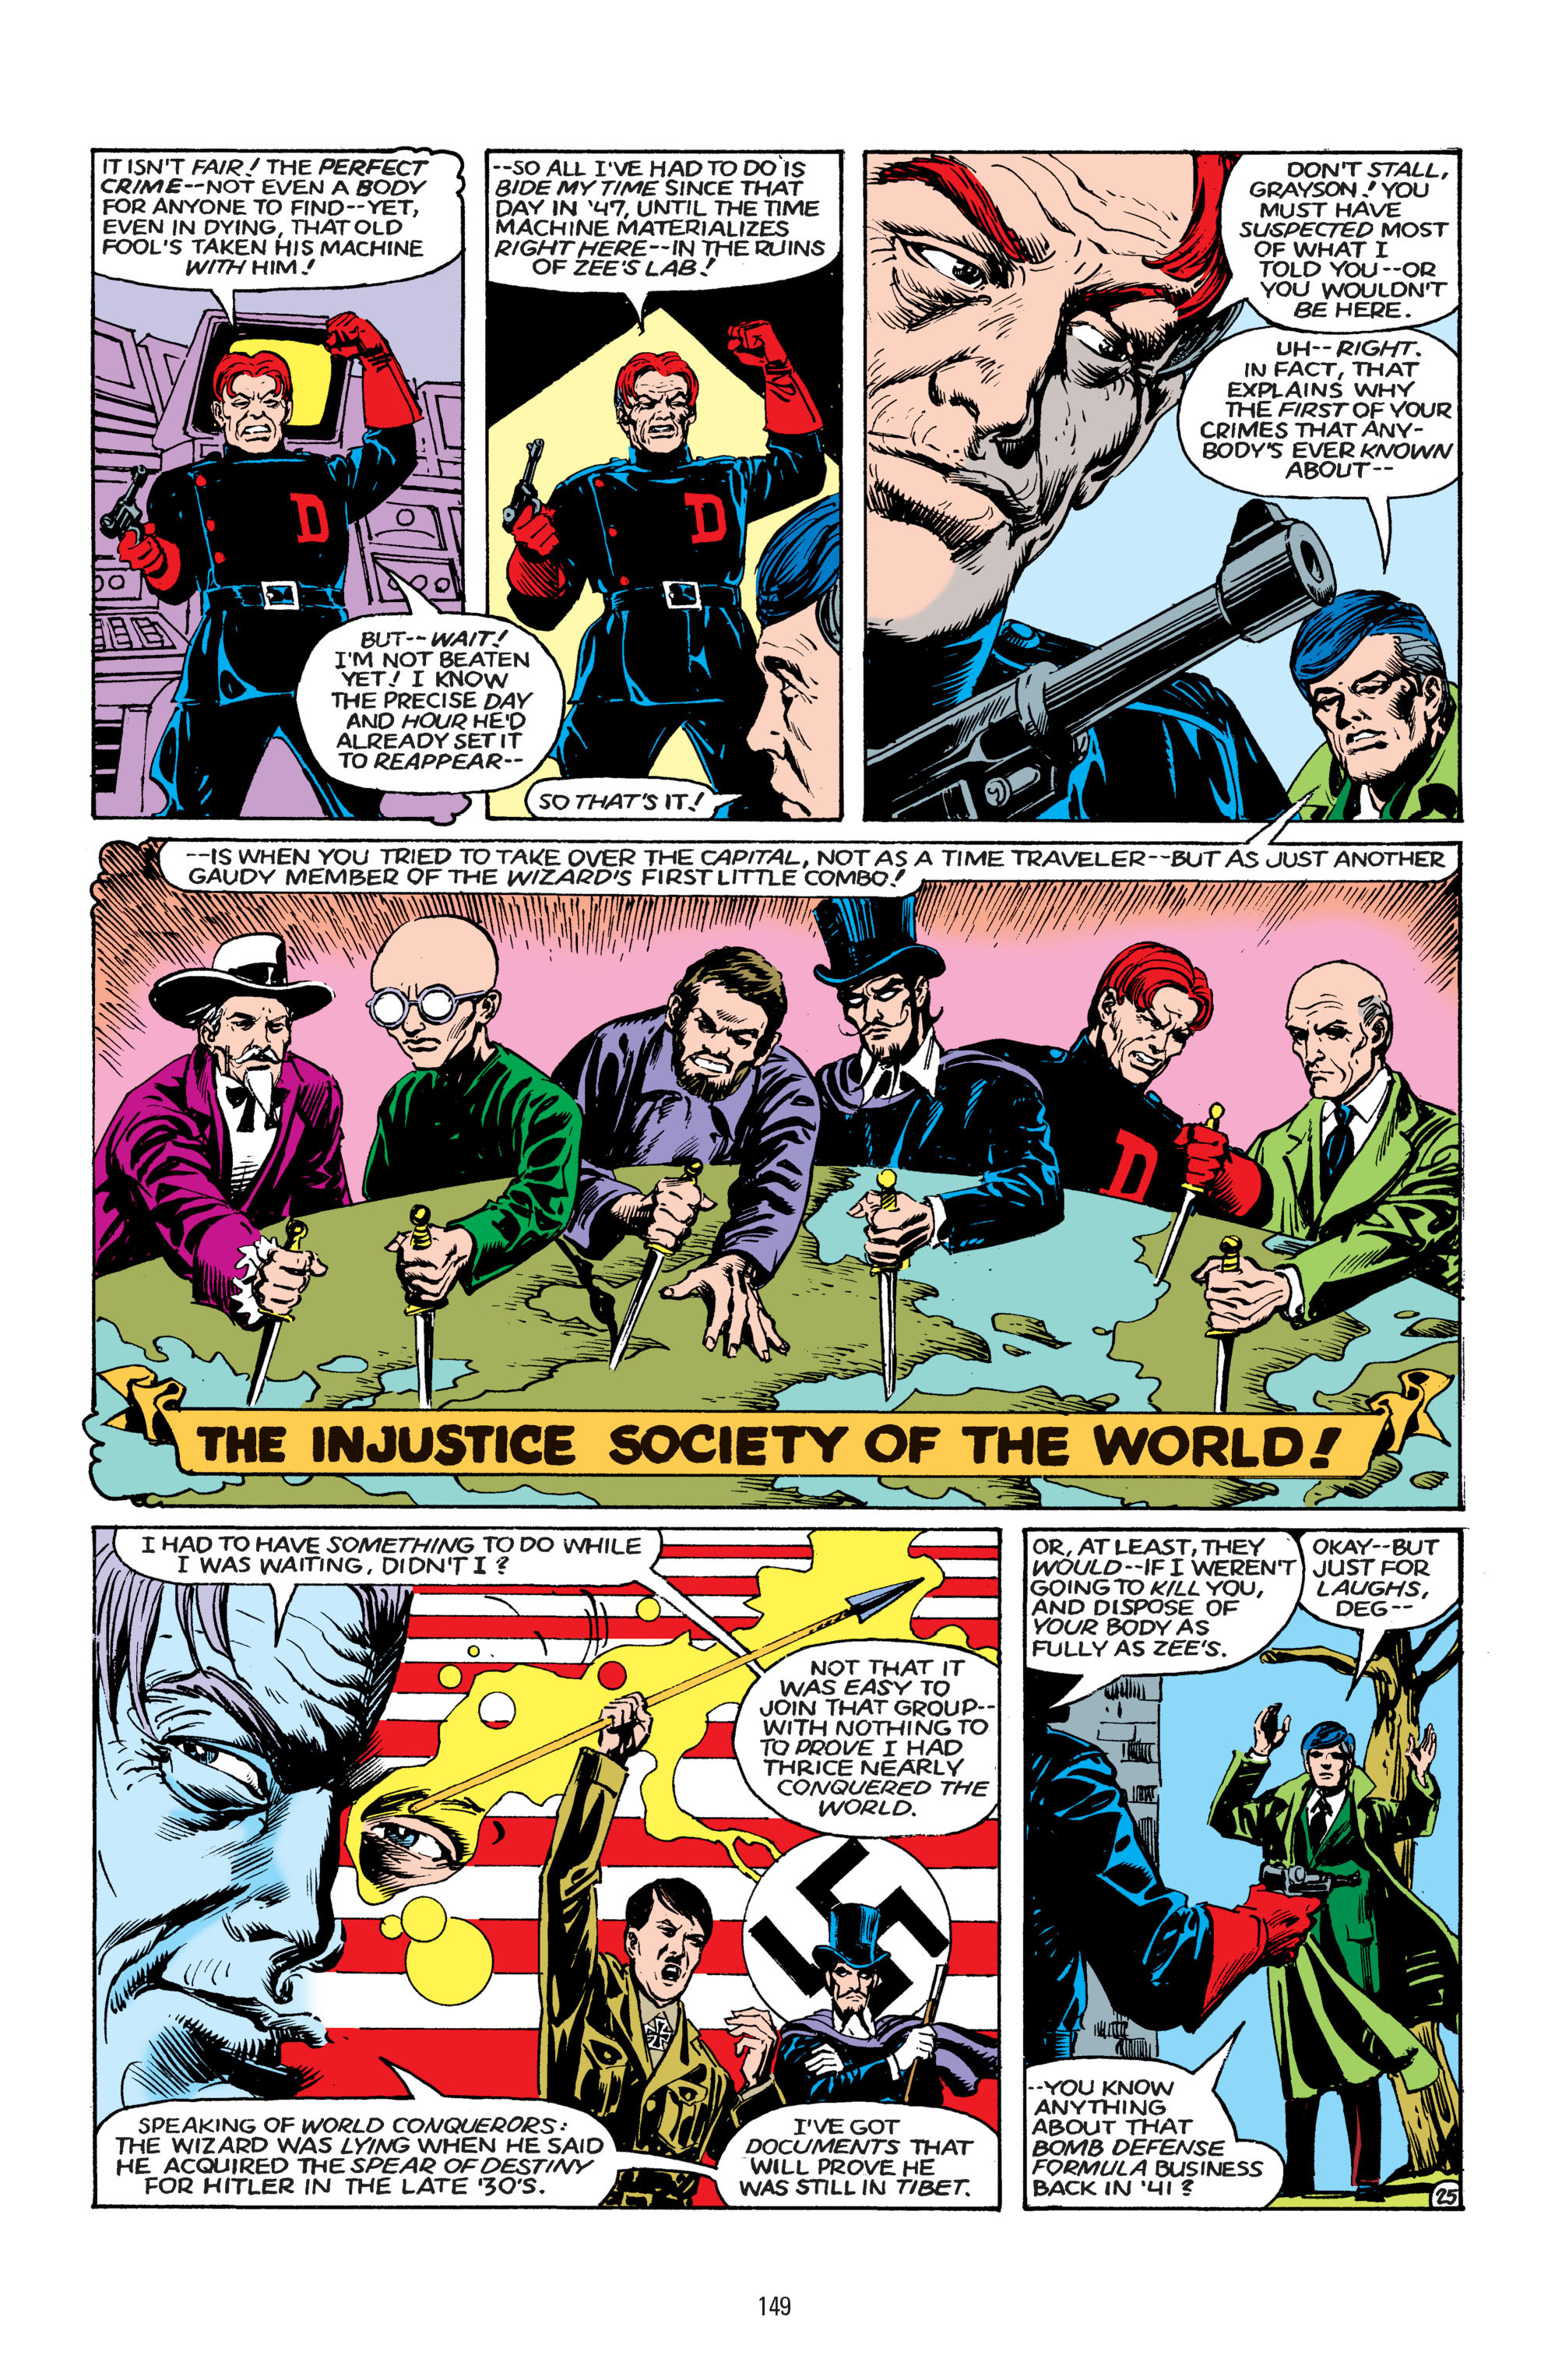 Read online America vs. the Justice Society comic -  Issue # TPB - 143